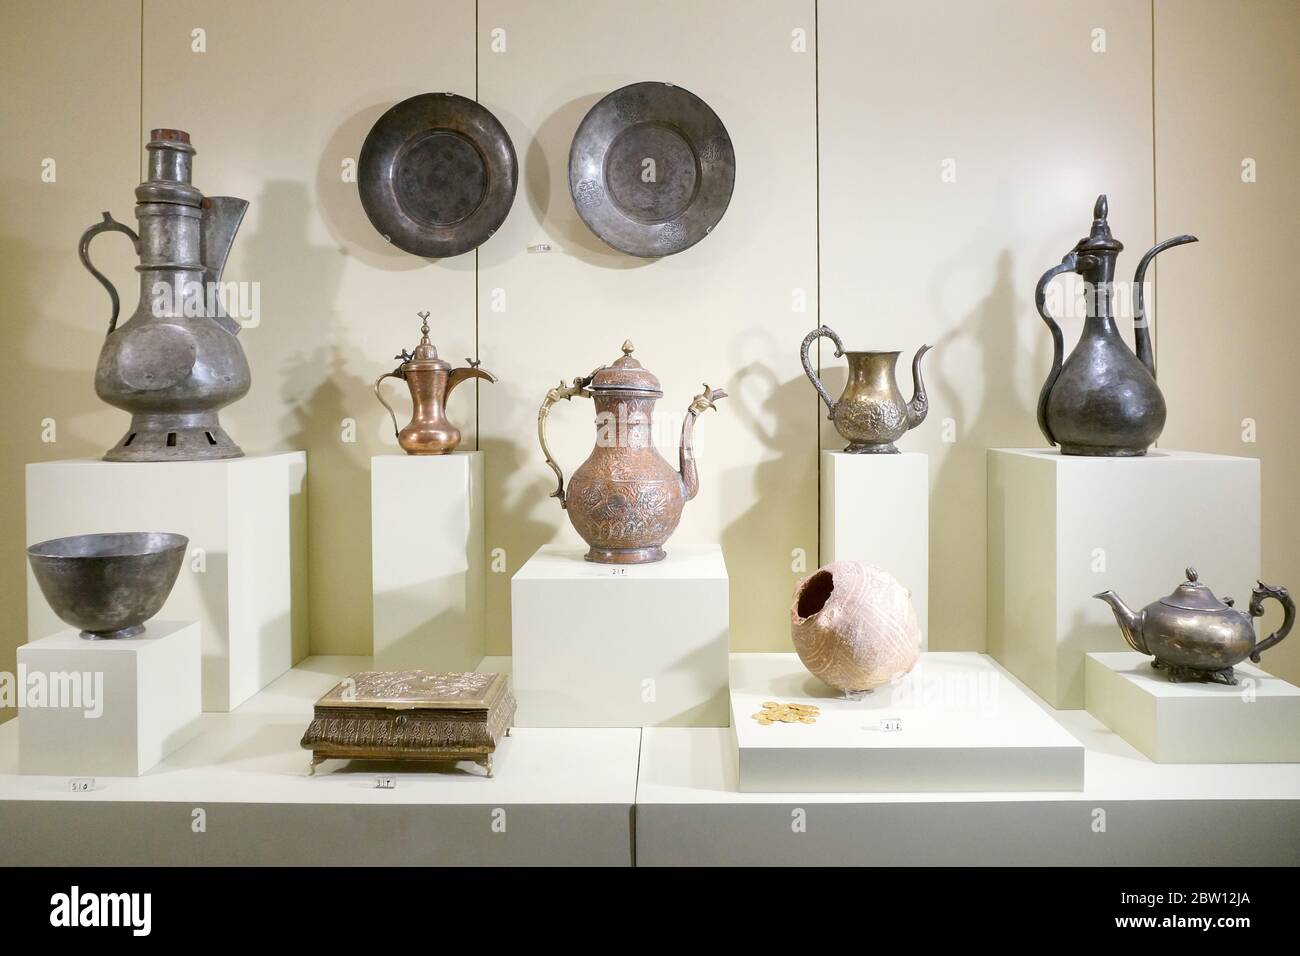 Antiques displayed at the National Museum, Riyadh, Kingdom of Saudi Arabia, Middle East. Photo taken on August 9, 2017. Stock Photo